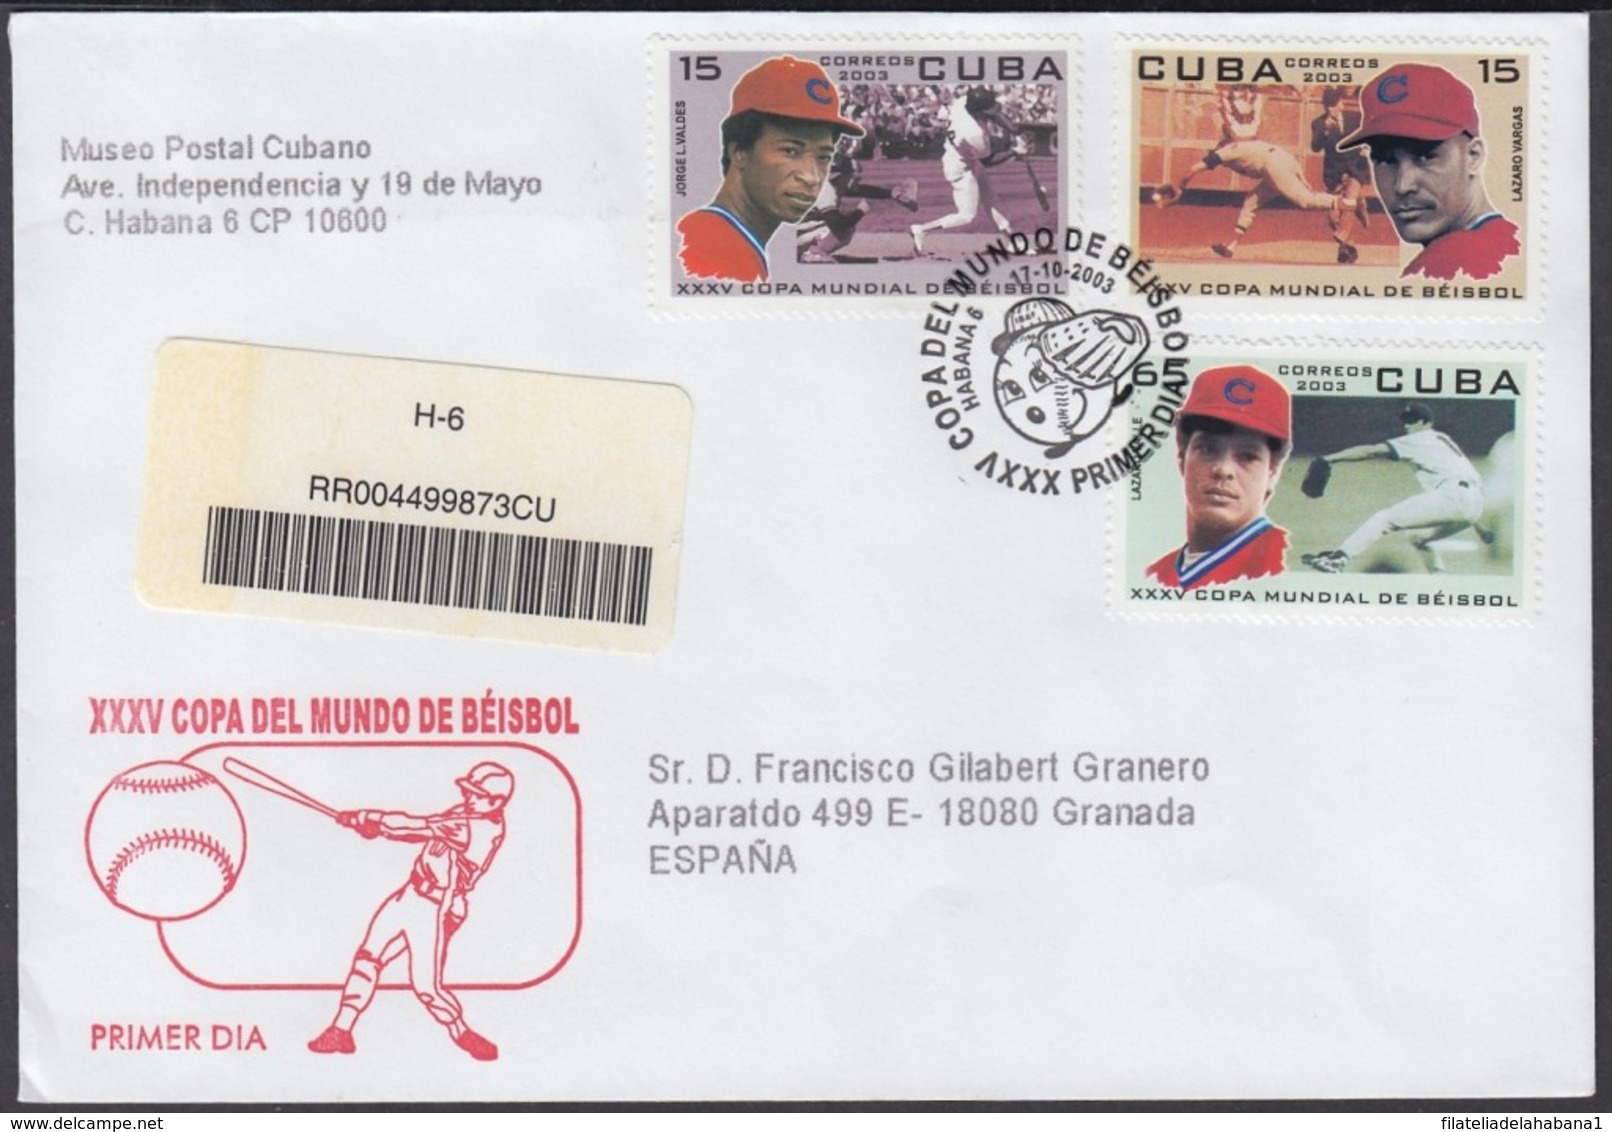 2003-FDC-55 CUBA FDC 2003. REGISTERED COVER TO SPAIN. 35 COPA MUNDIAL DE BEISBOL, BASEBALL WORLD CUP. - FDC